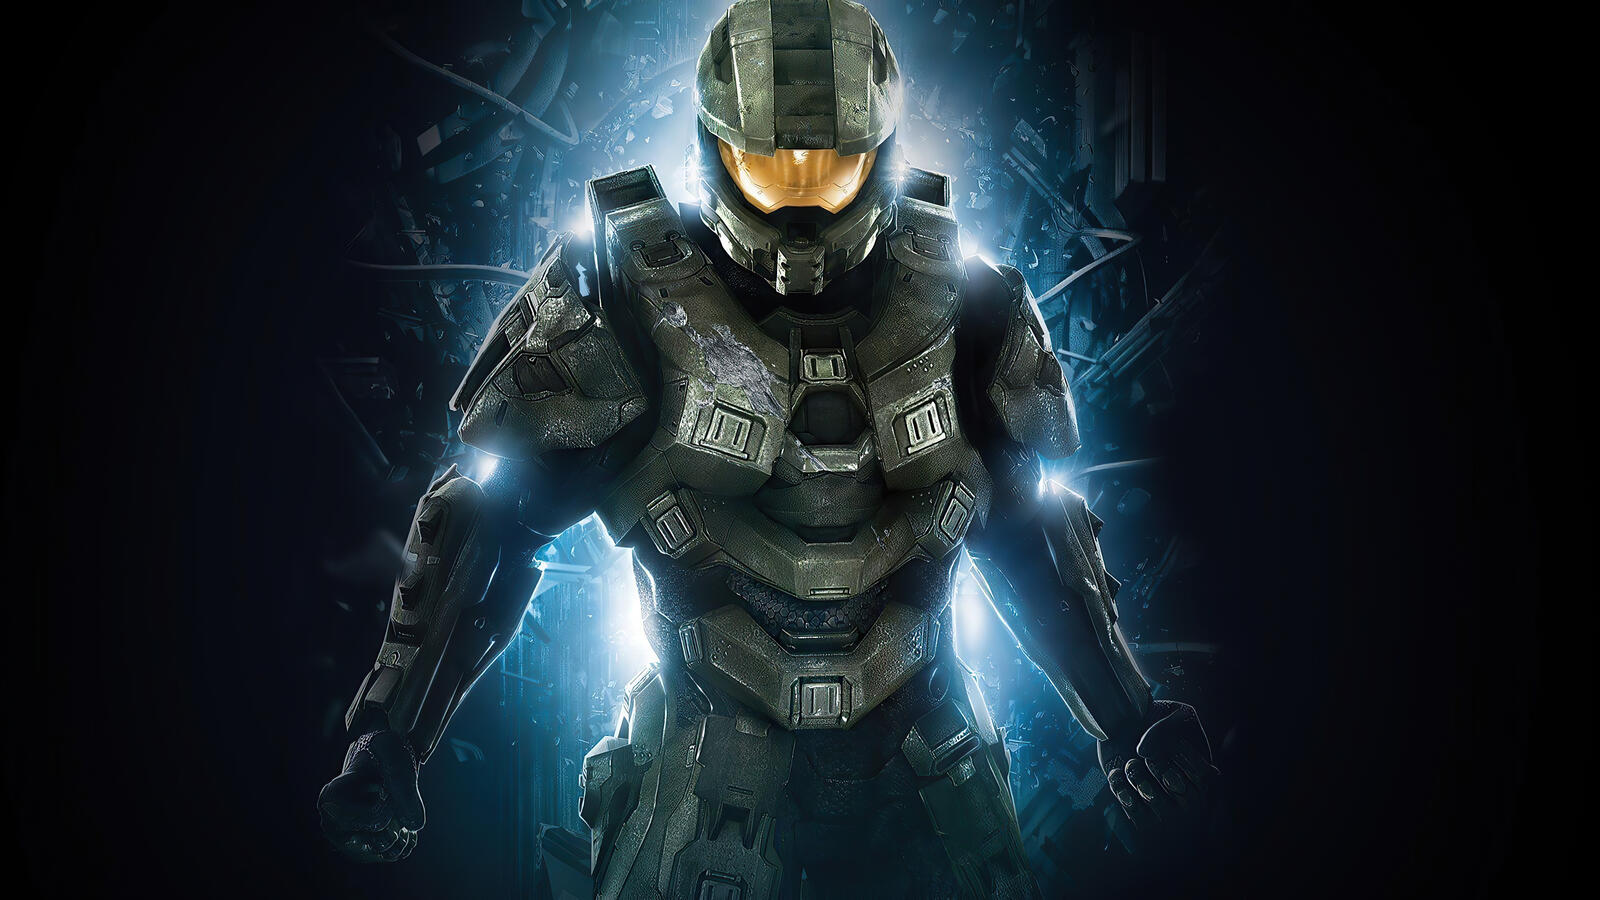 Free photo The robot from the game Halo